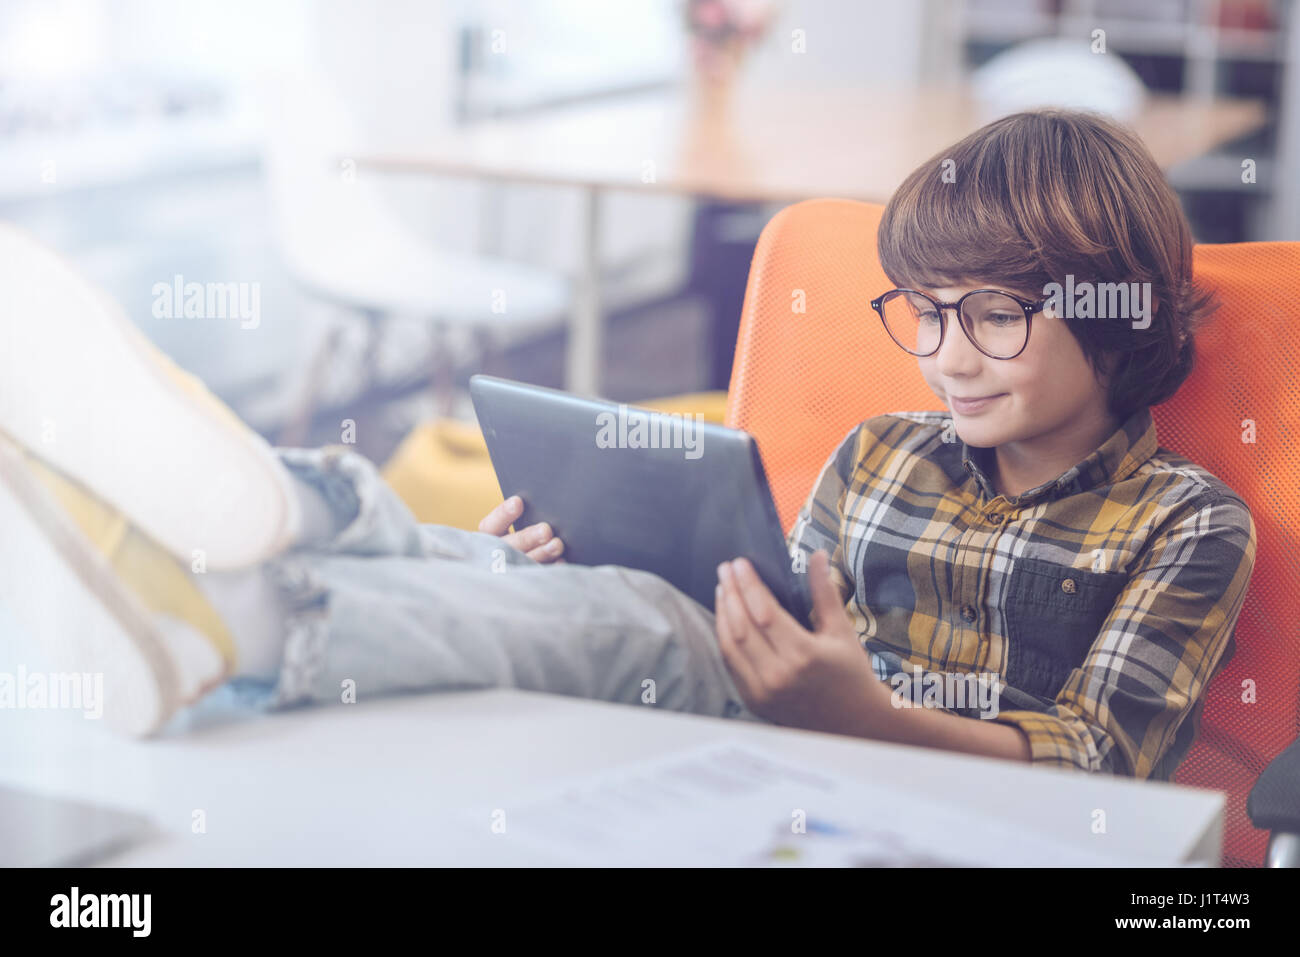 Boy using digital tablet with feet up Stock Photo